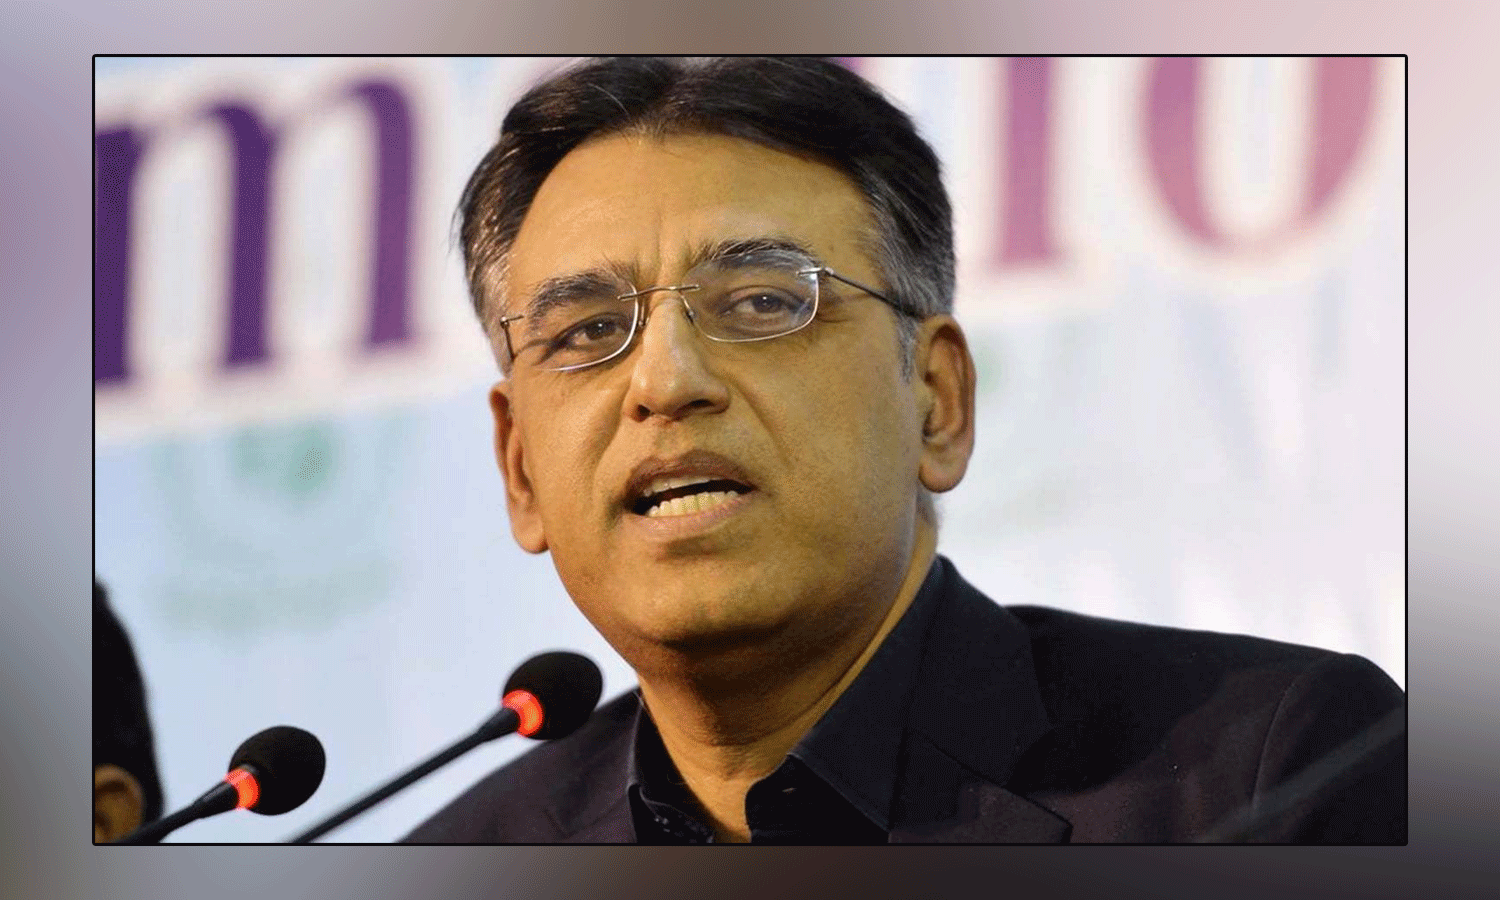 Asad Umar claims that 3 vaccines will be available in Pakistan soon to control the global epidemic